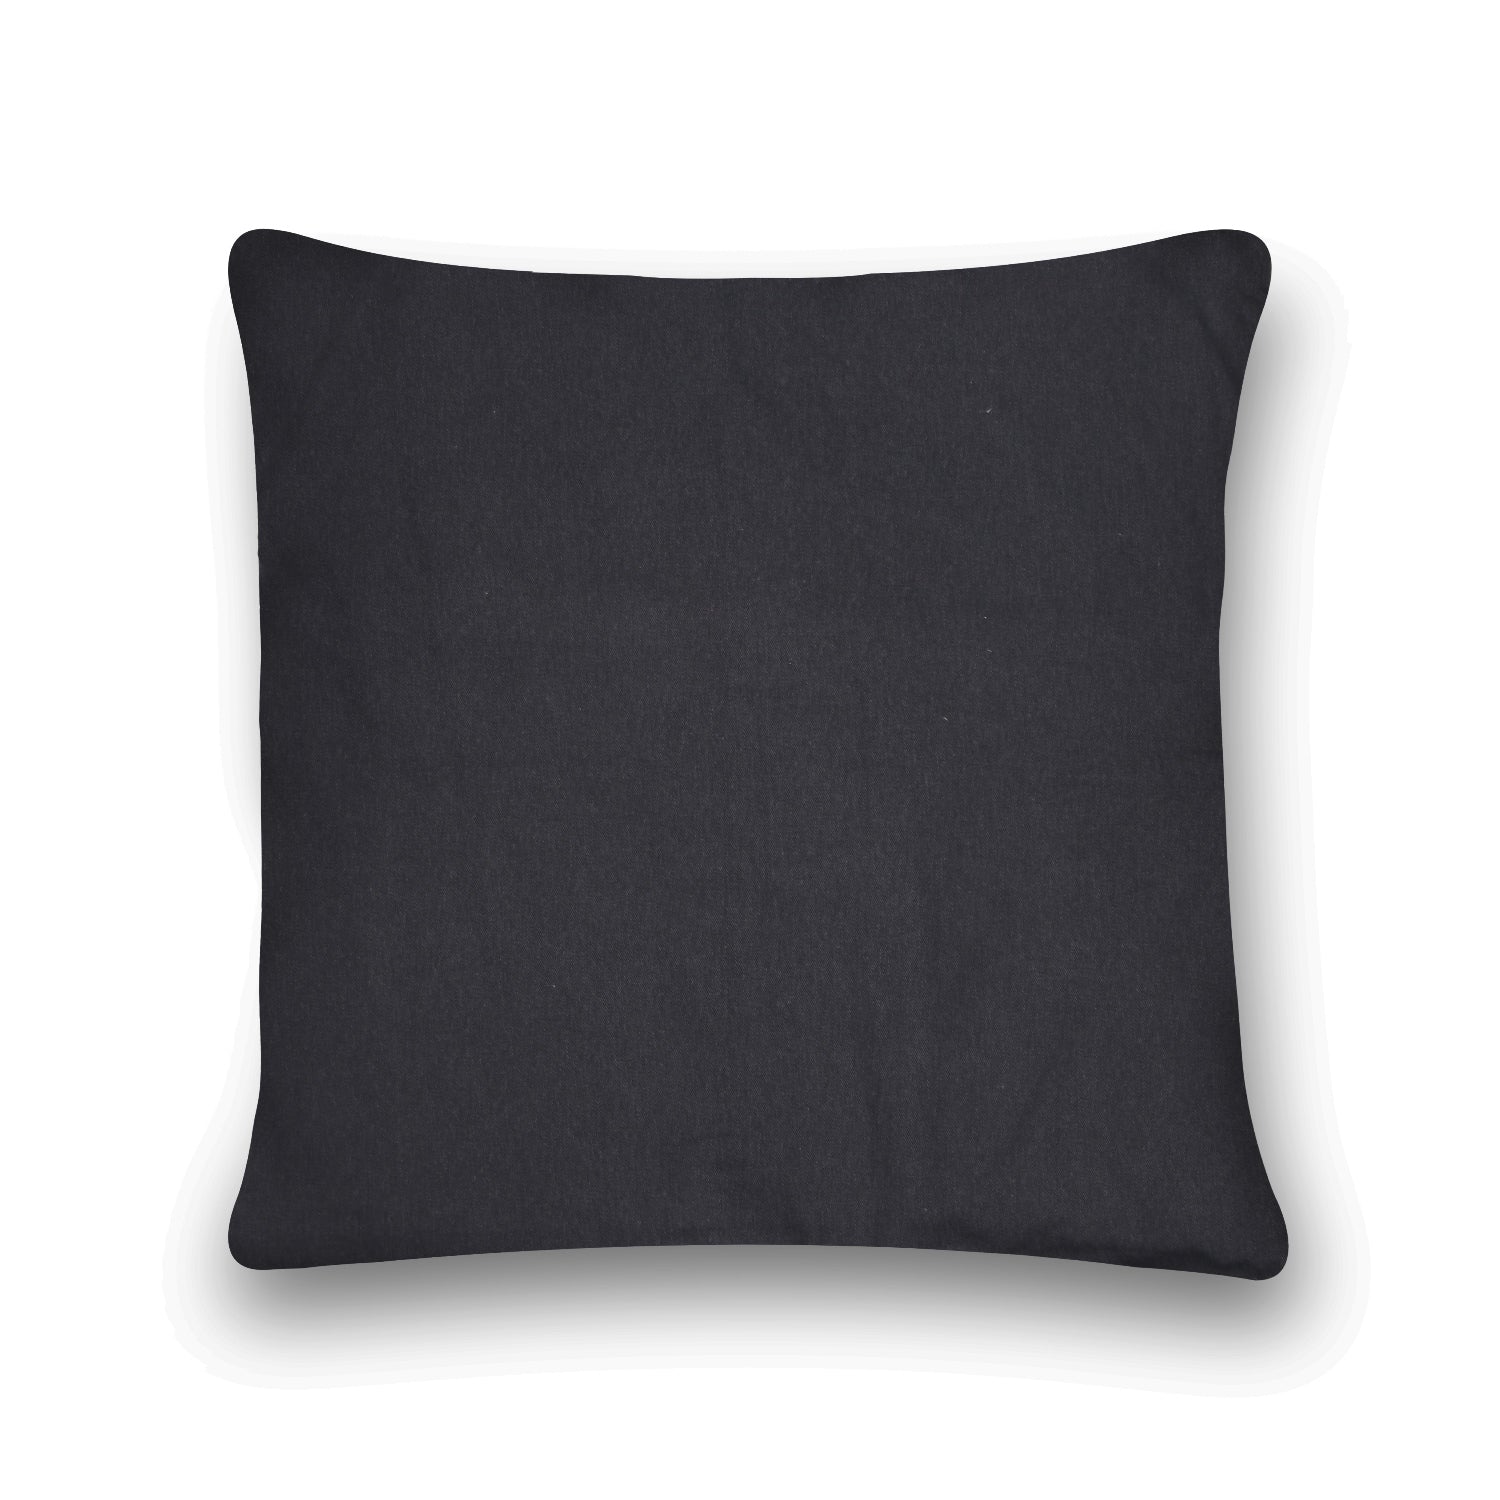 'Surreal Perspectives' 100% Cotton Velvet Cushion Cover